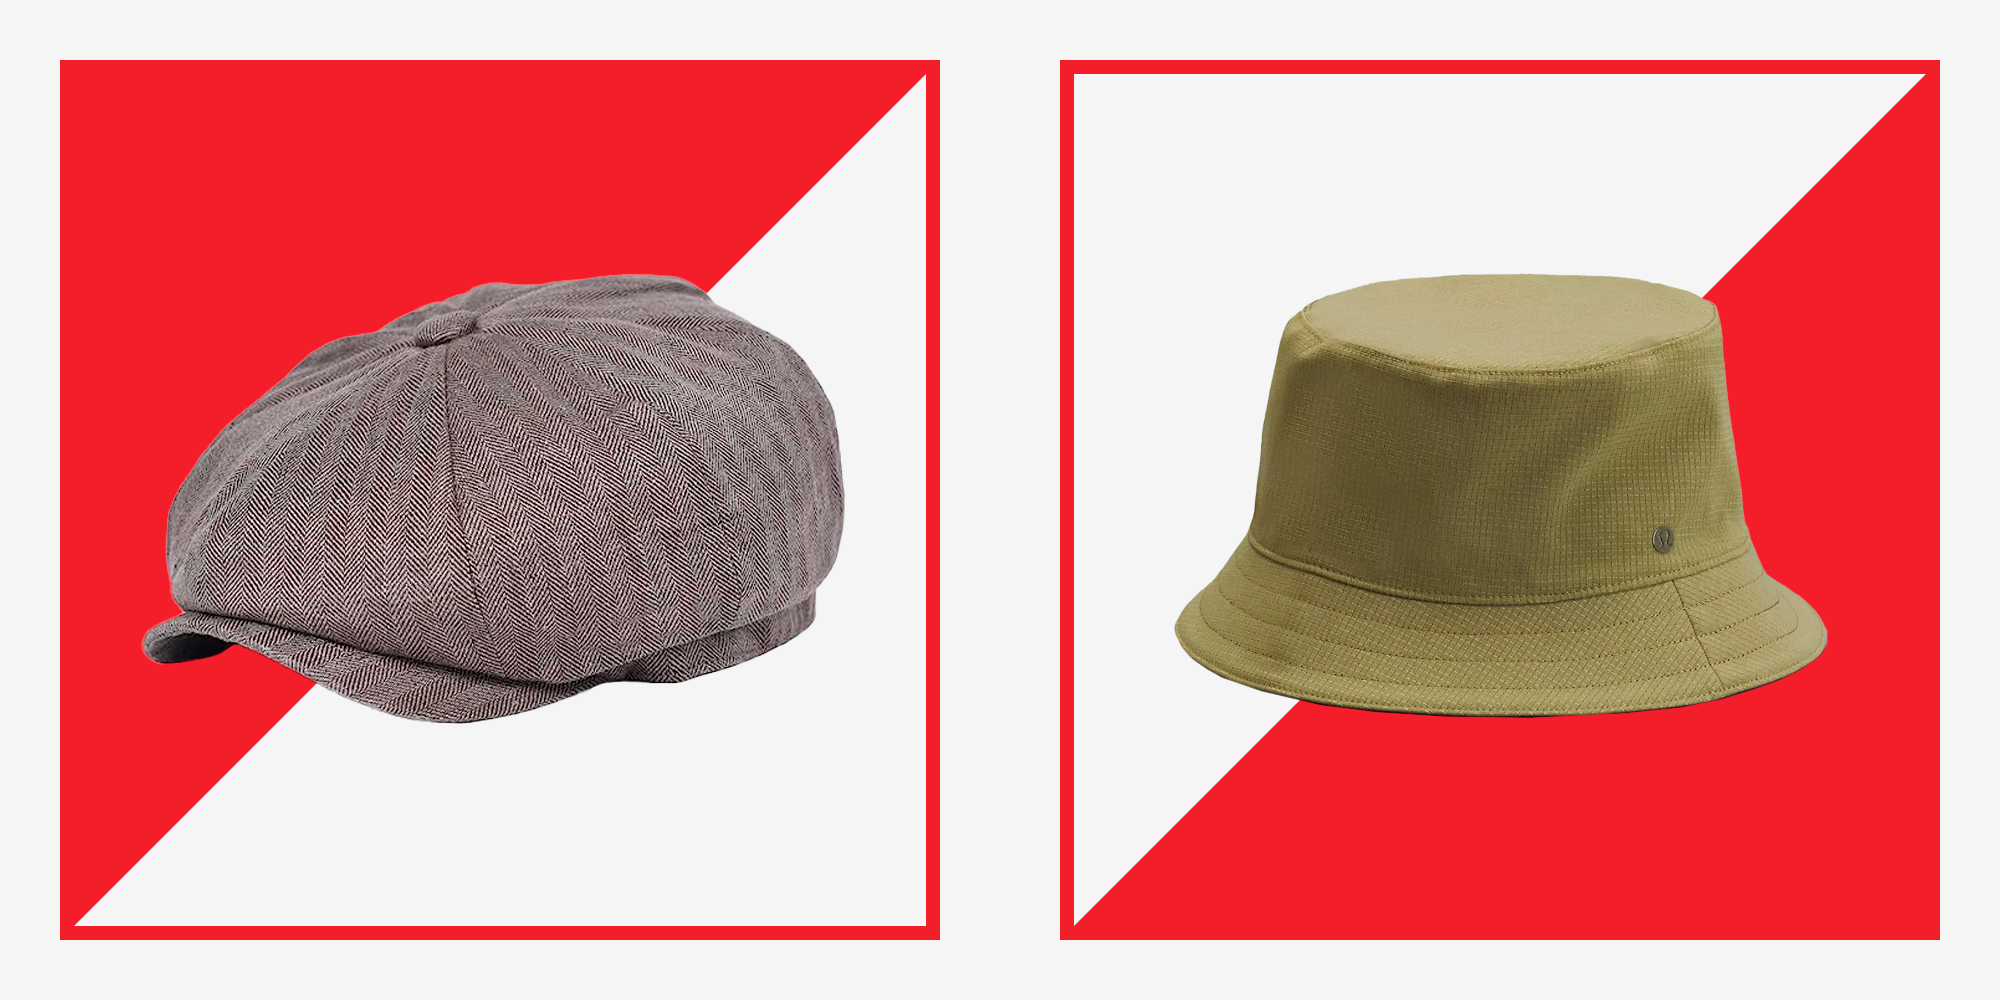 What Are the Different Types of Hats?